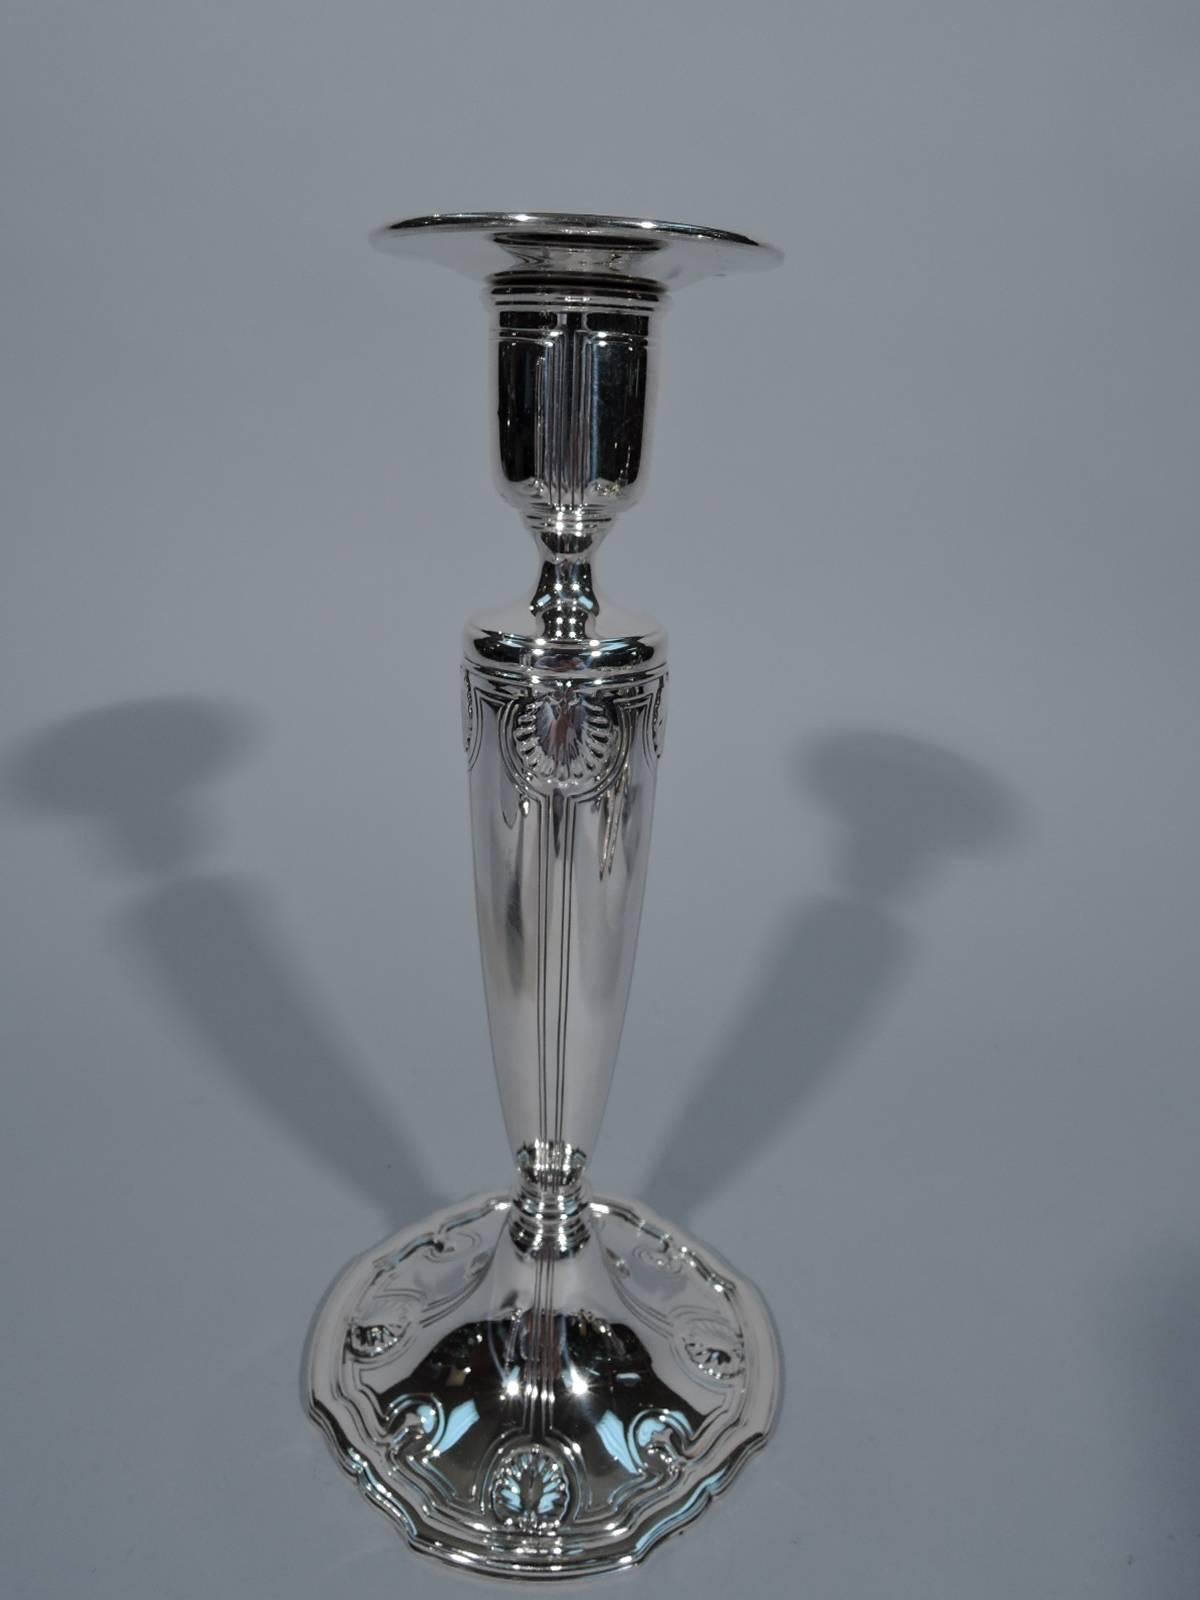 Pair of sterling silver candlesticks. Made by Tiffany & Co. in New York, circa 1911. Each: tapering column on shaped foot, urn socket and detachable bobeche. Engraved curvilinear frames and applied scallop shells and trefoils. Restrained and soft.